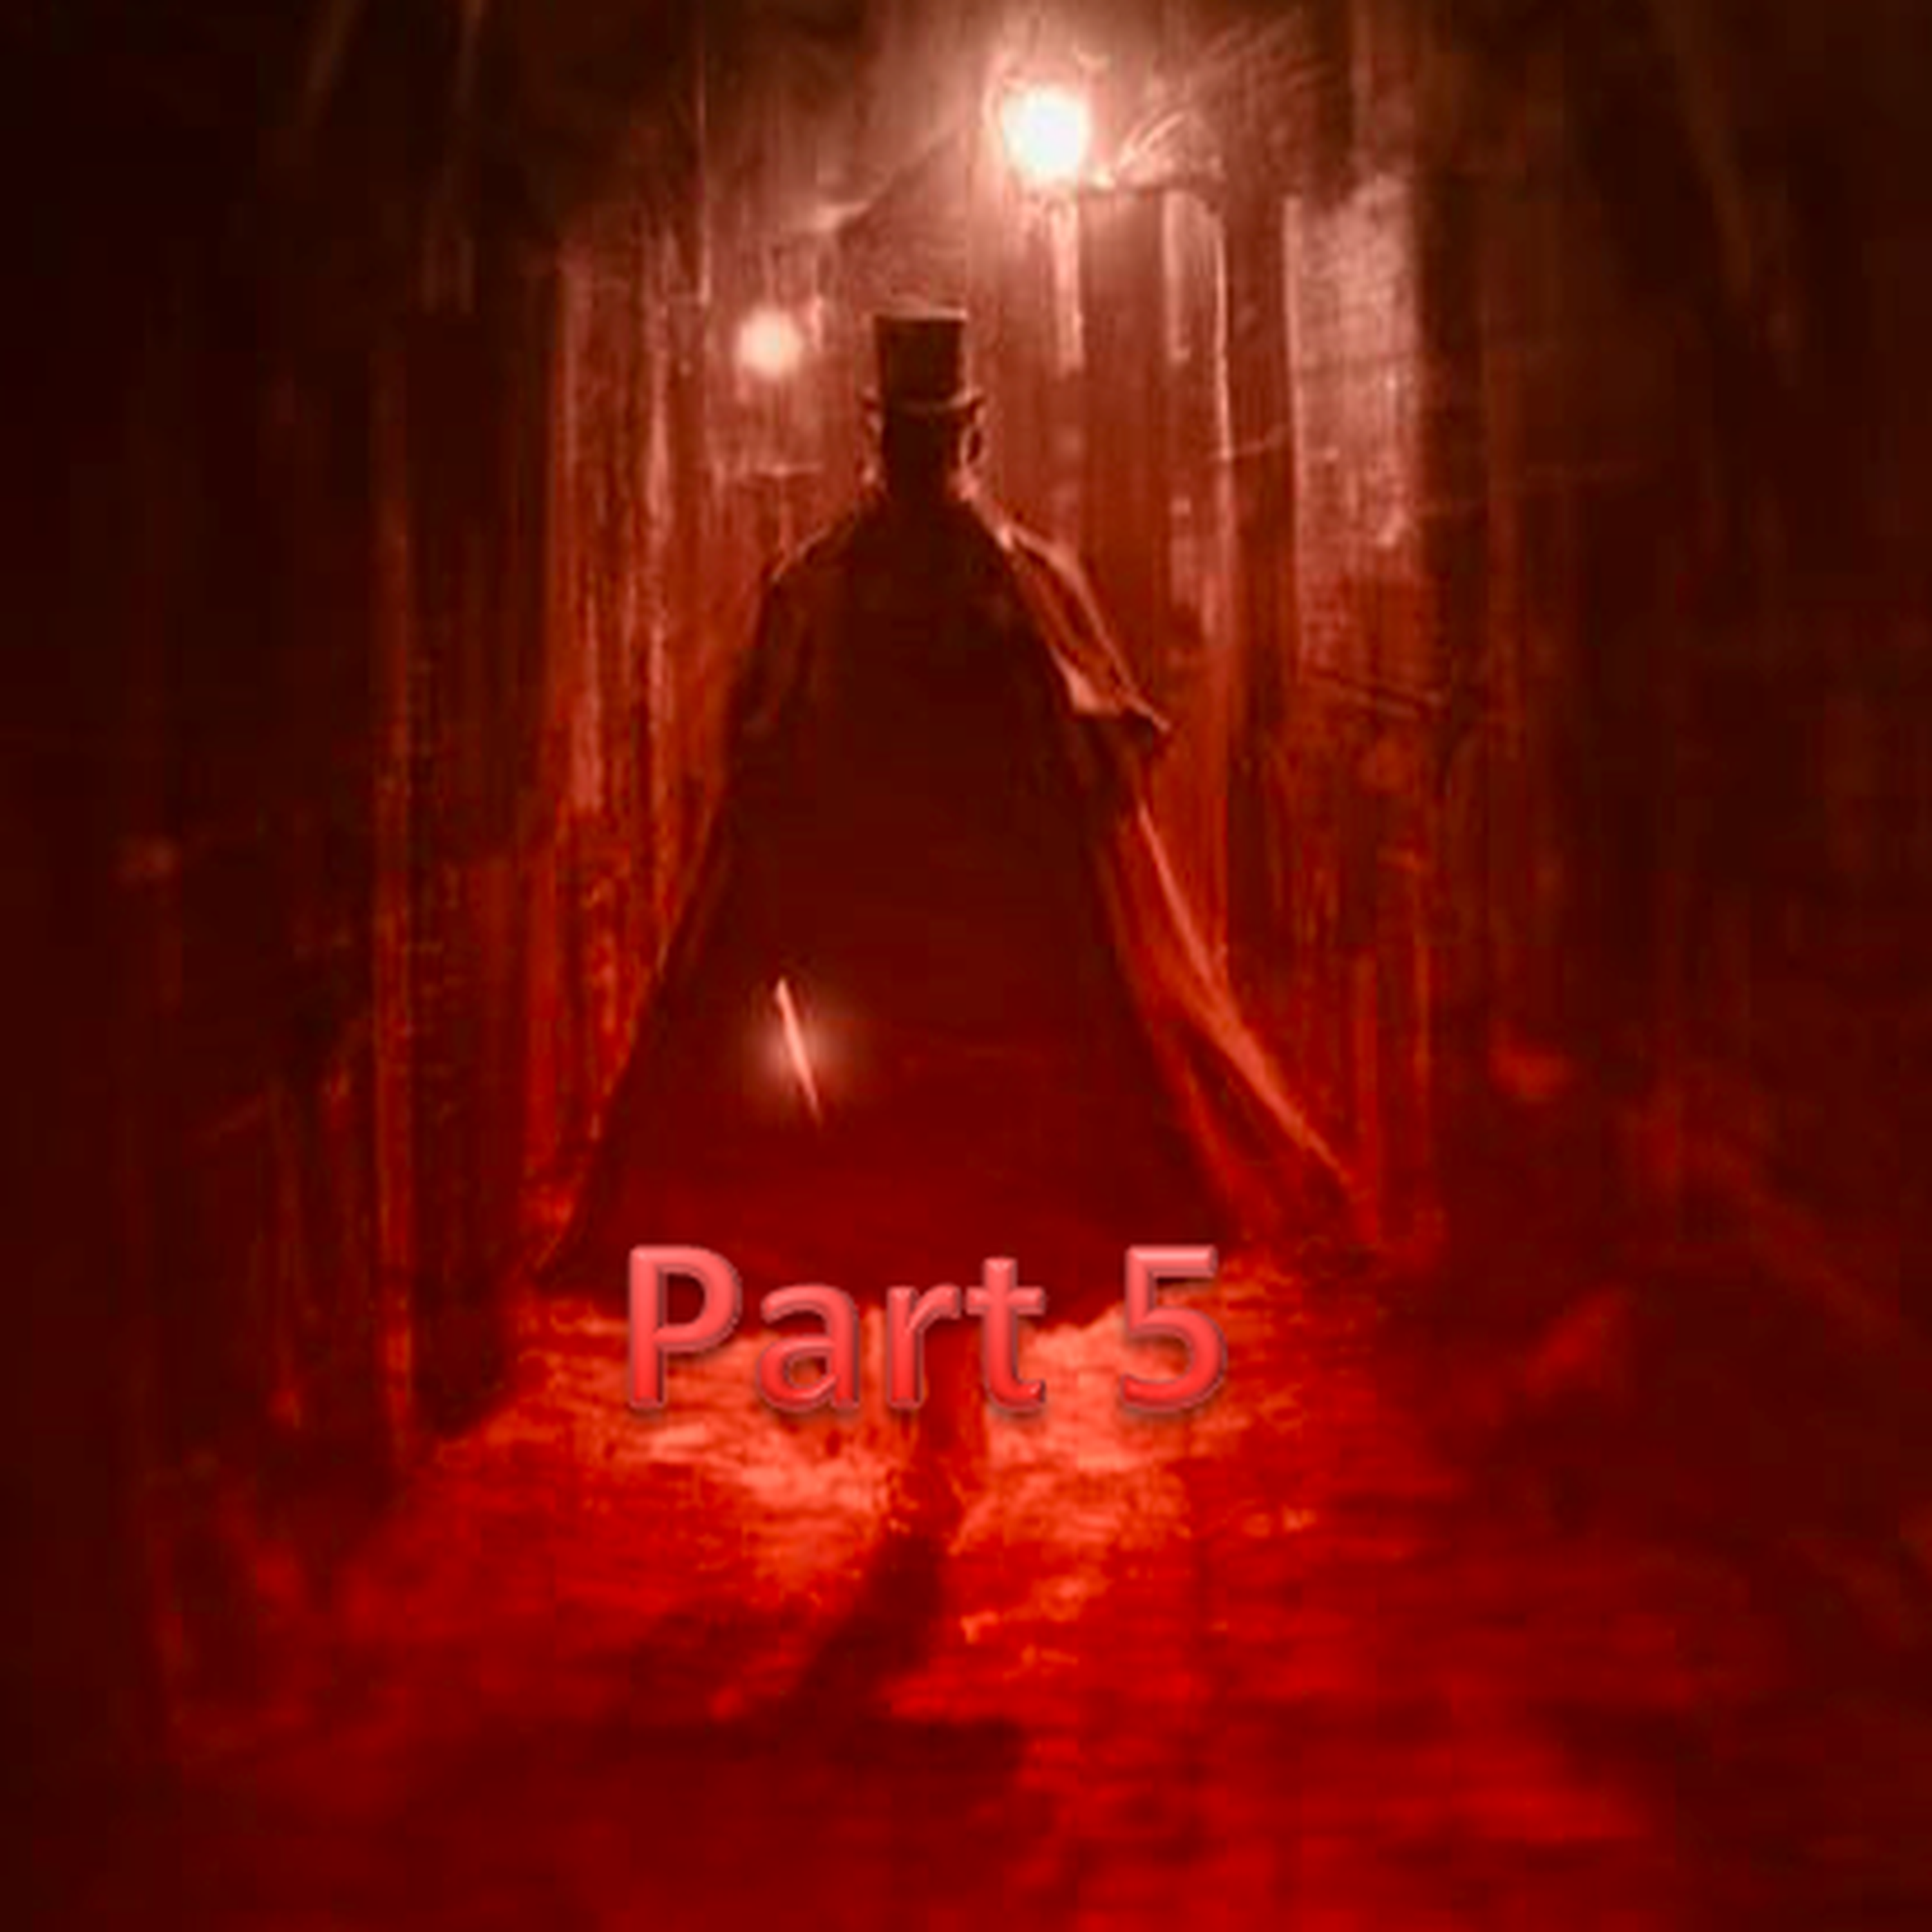 Jack the Ripper - Part 5